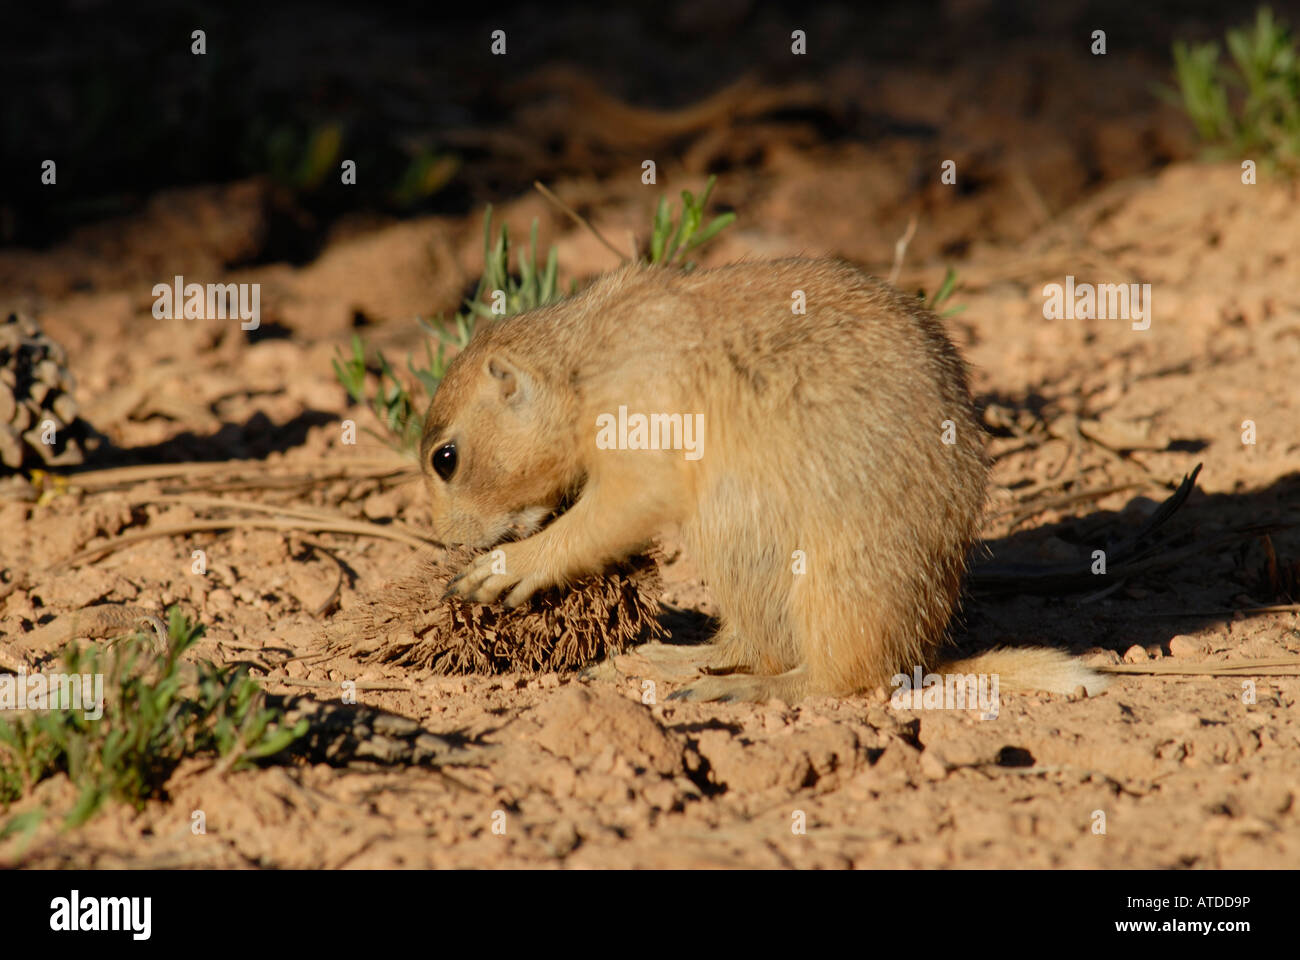 Stock photo of a Utah prairie dog eating seeds from a pine cone. Stock Photo